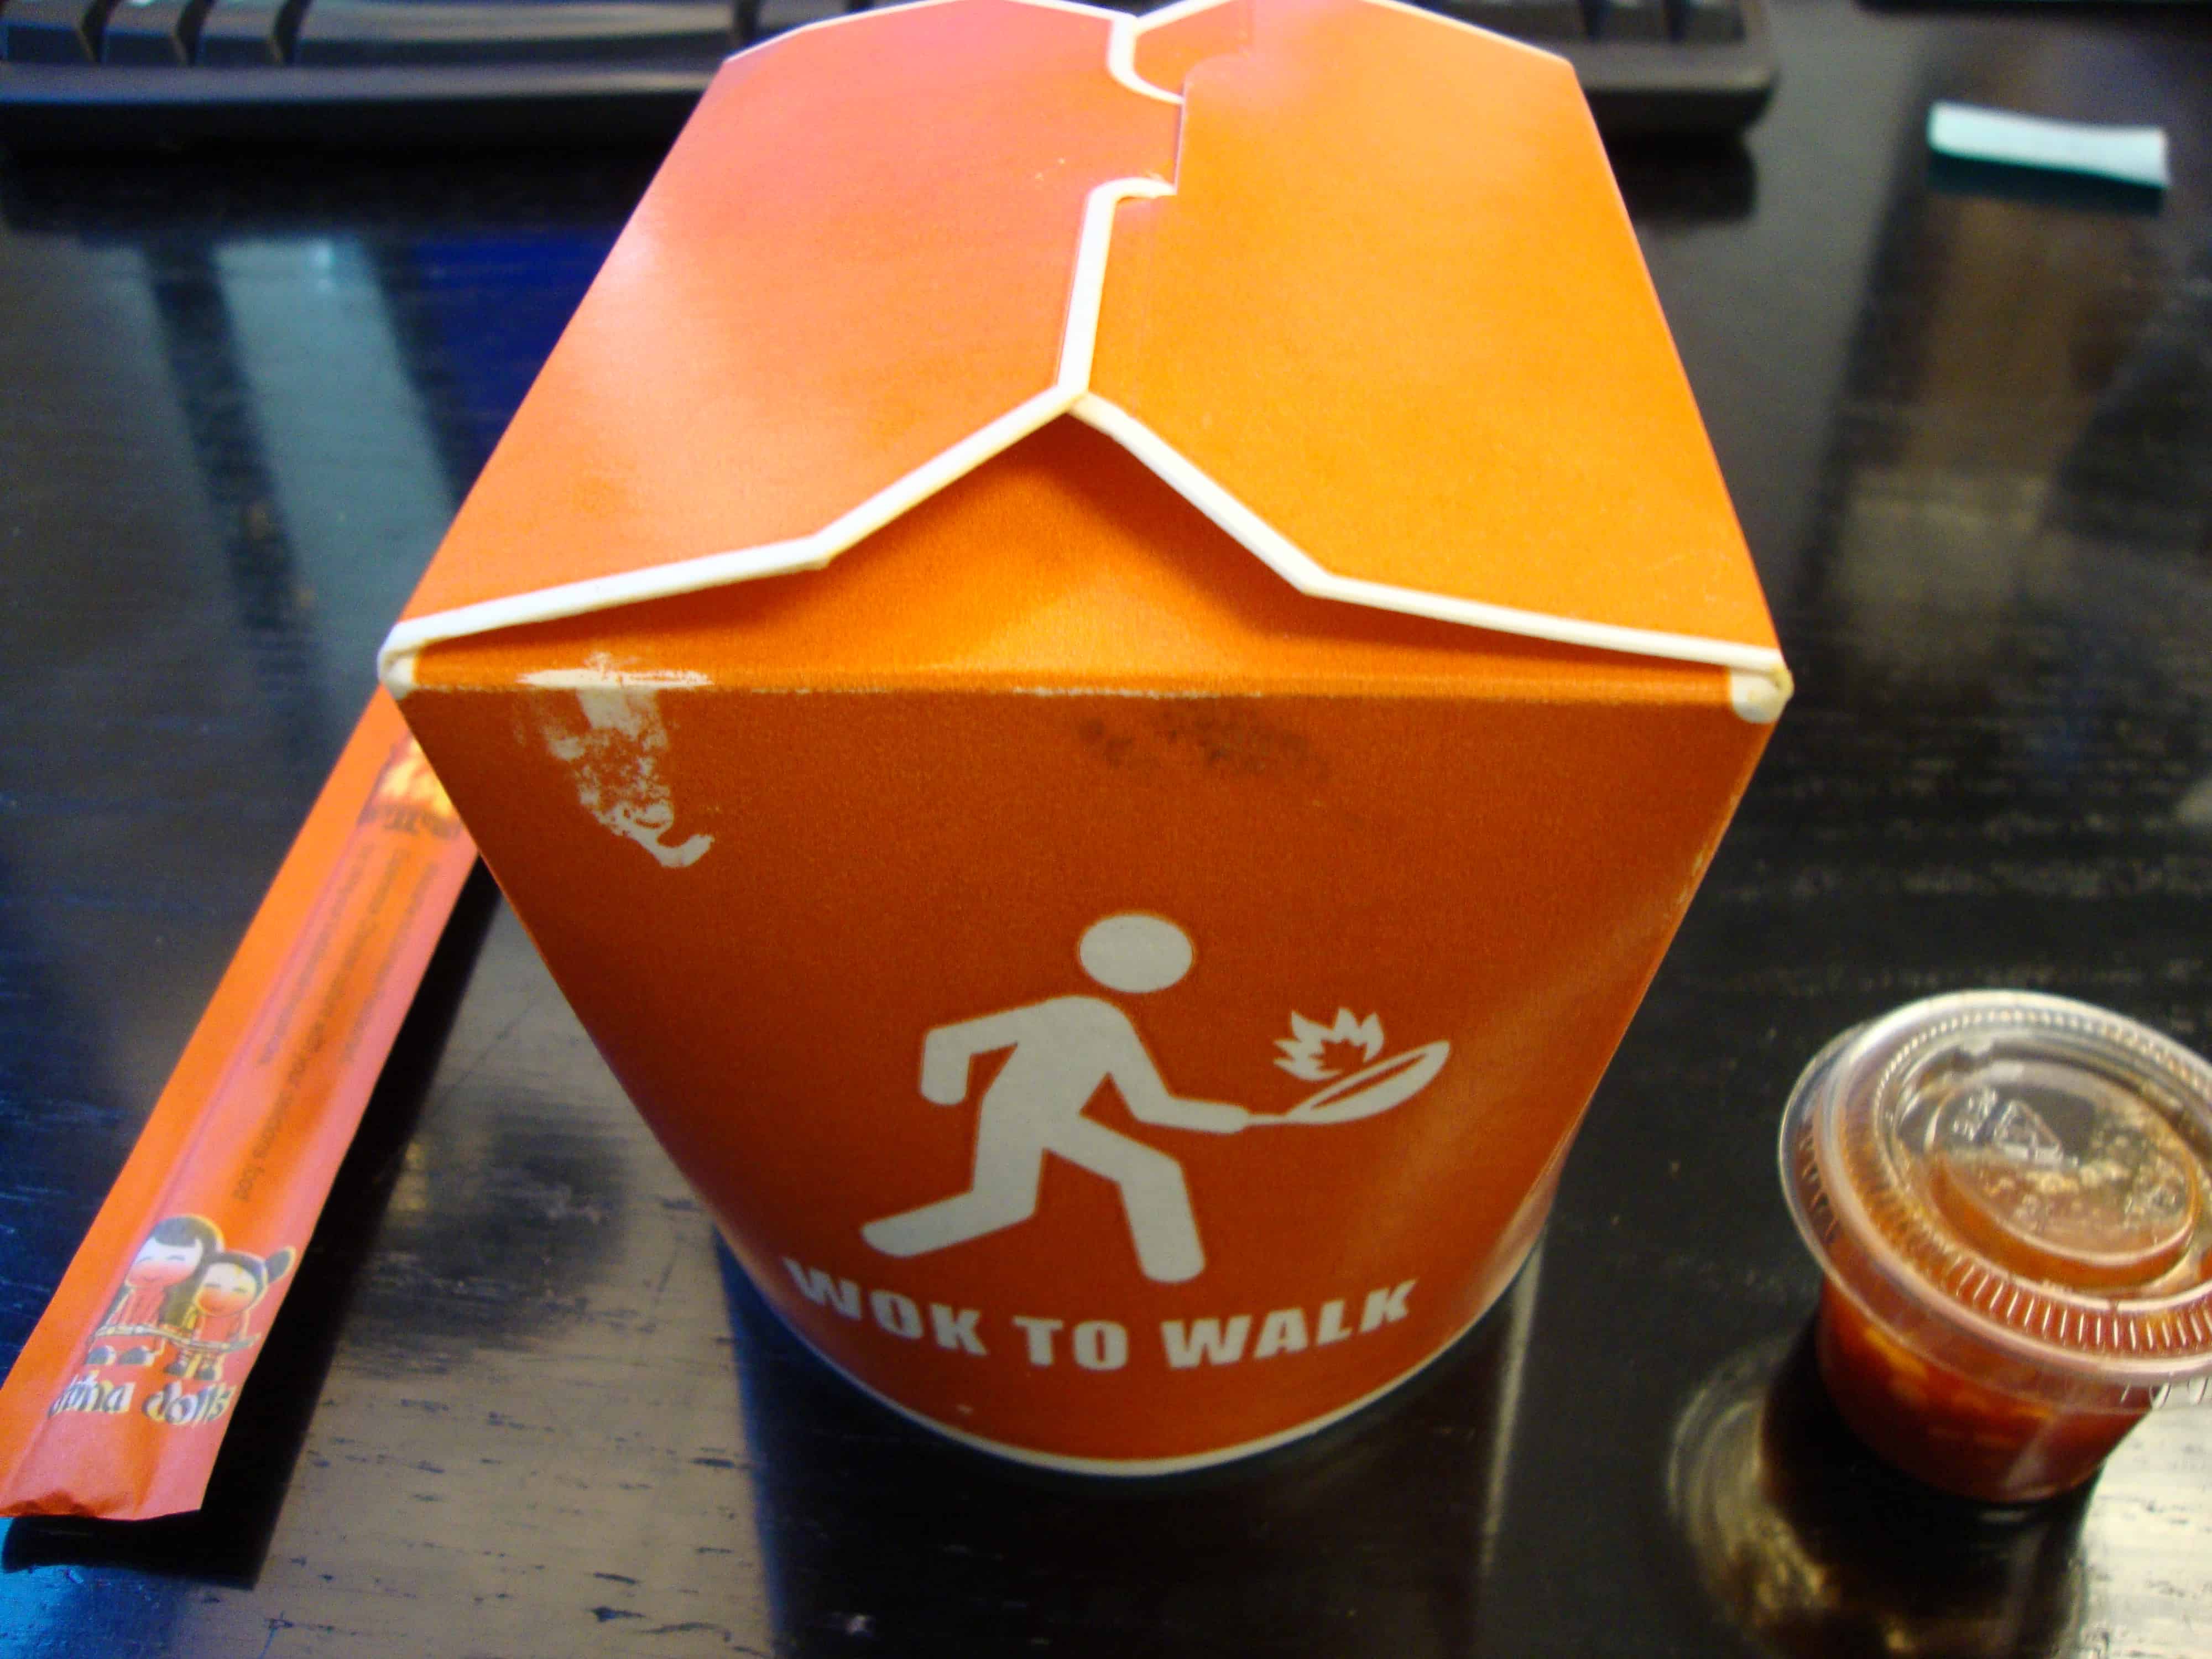 1-6-10 Wok to Walk container